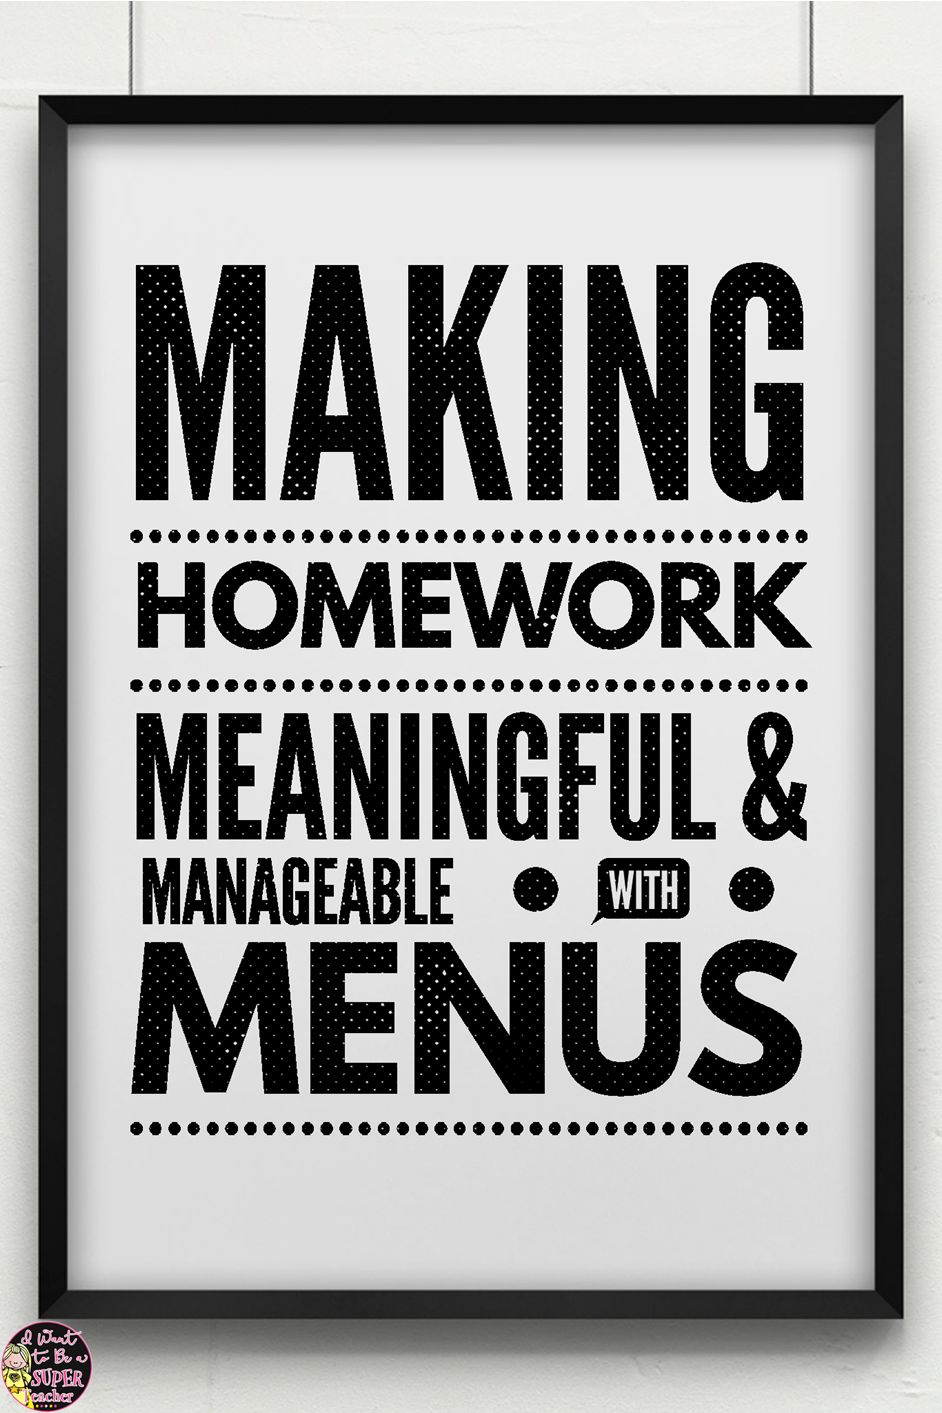 Looking for a new homework management solution? Try homework menus! Tips on how to organize your homework practices using menus to motivate your kids and differentiate through choice. Click for details PLUS free printables to get you started.